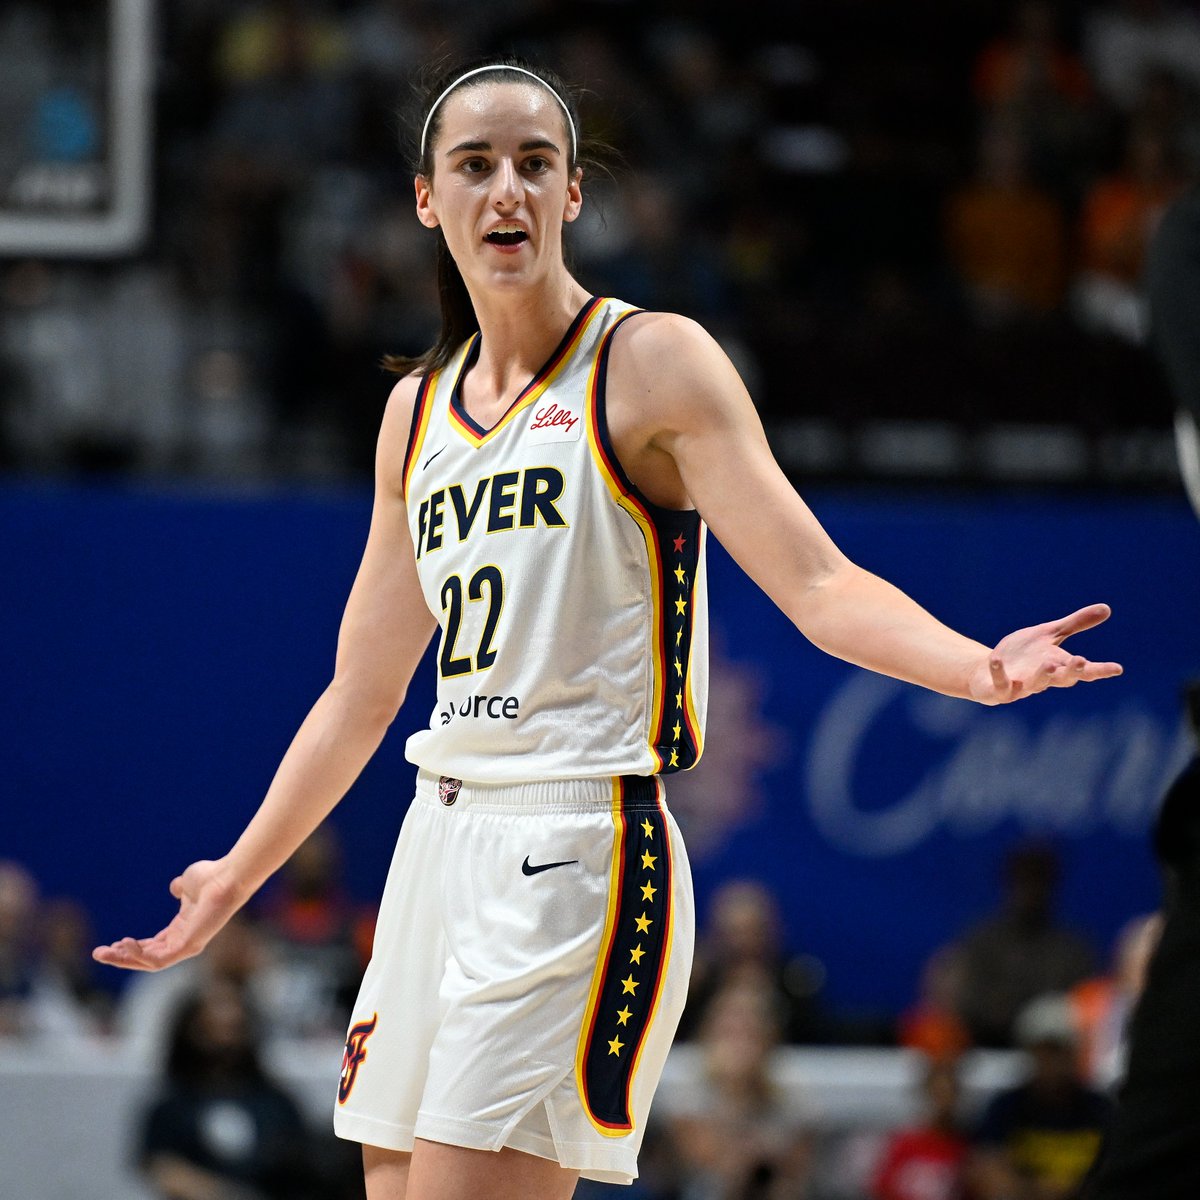 Caitlin Clark in the first half of her WNBA debut: ▪️ 7 PTS ▪️ 2-7 FG ▪️ 1 AST ▪️ 5 TO